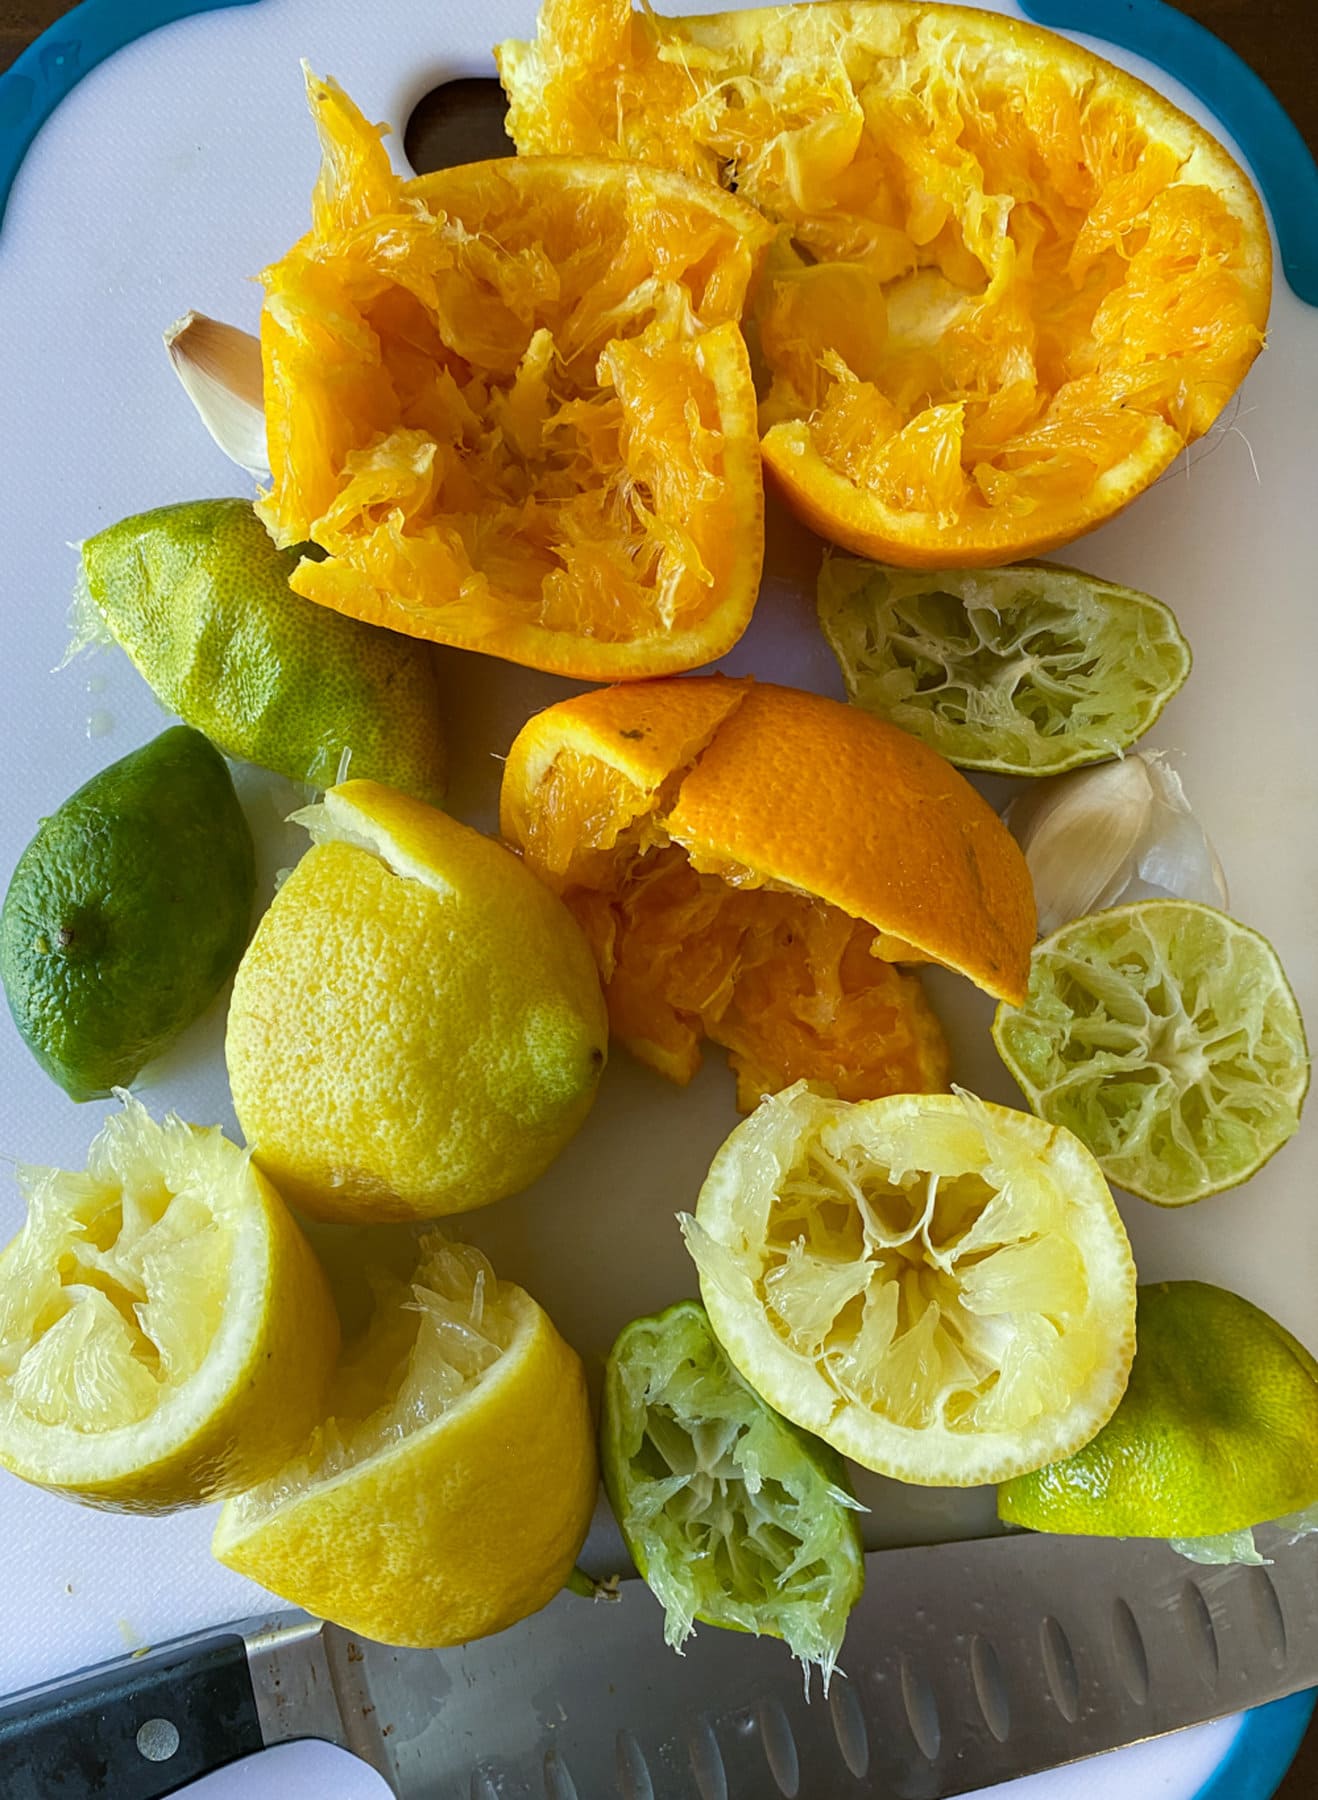 squeezed limes, lemons, and oranges